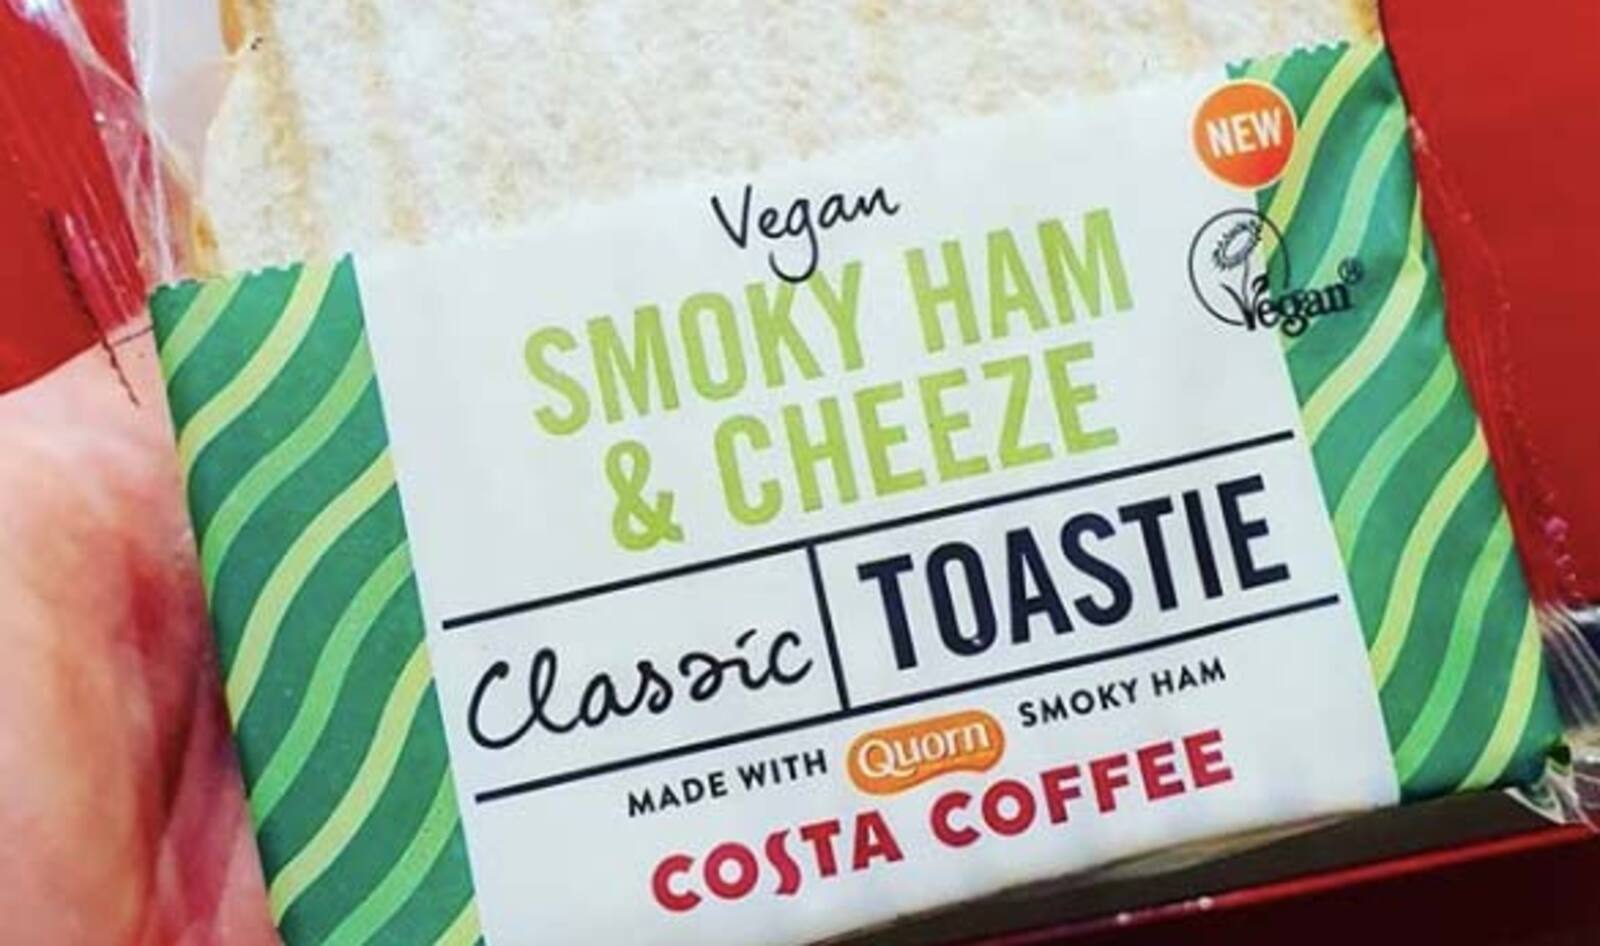 UK’s Largest Coffee Chain Launches Vegan Ham and Cheese Sandwiches&nbsp;